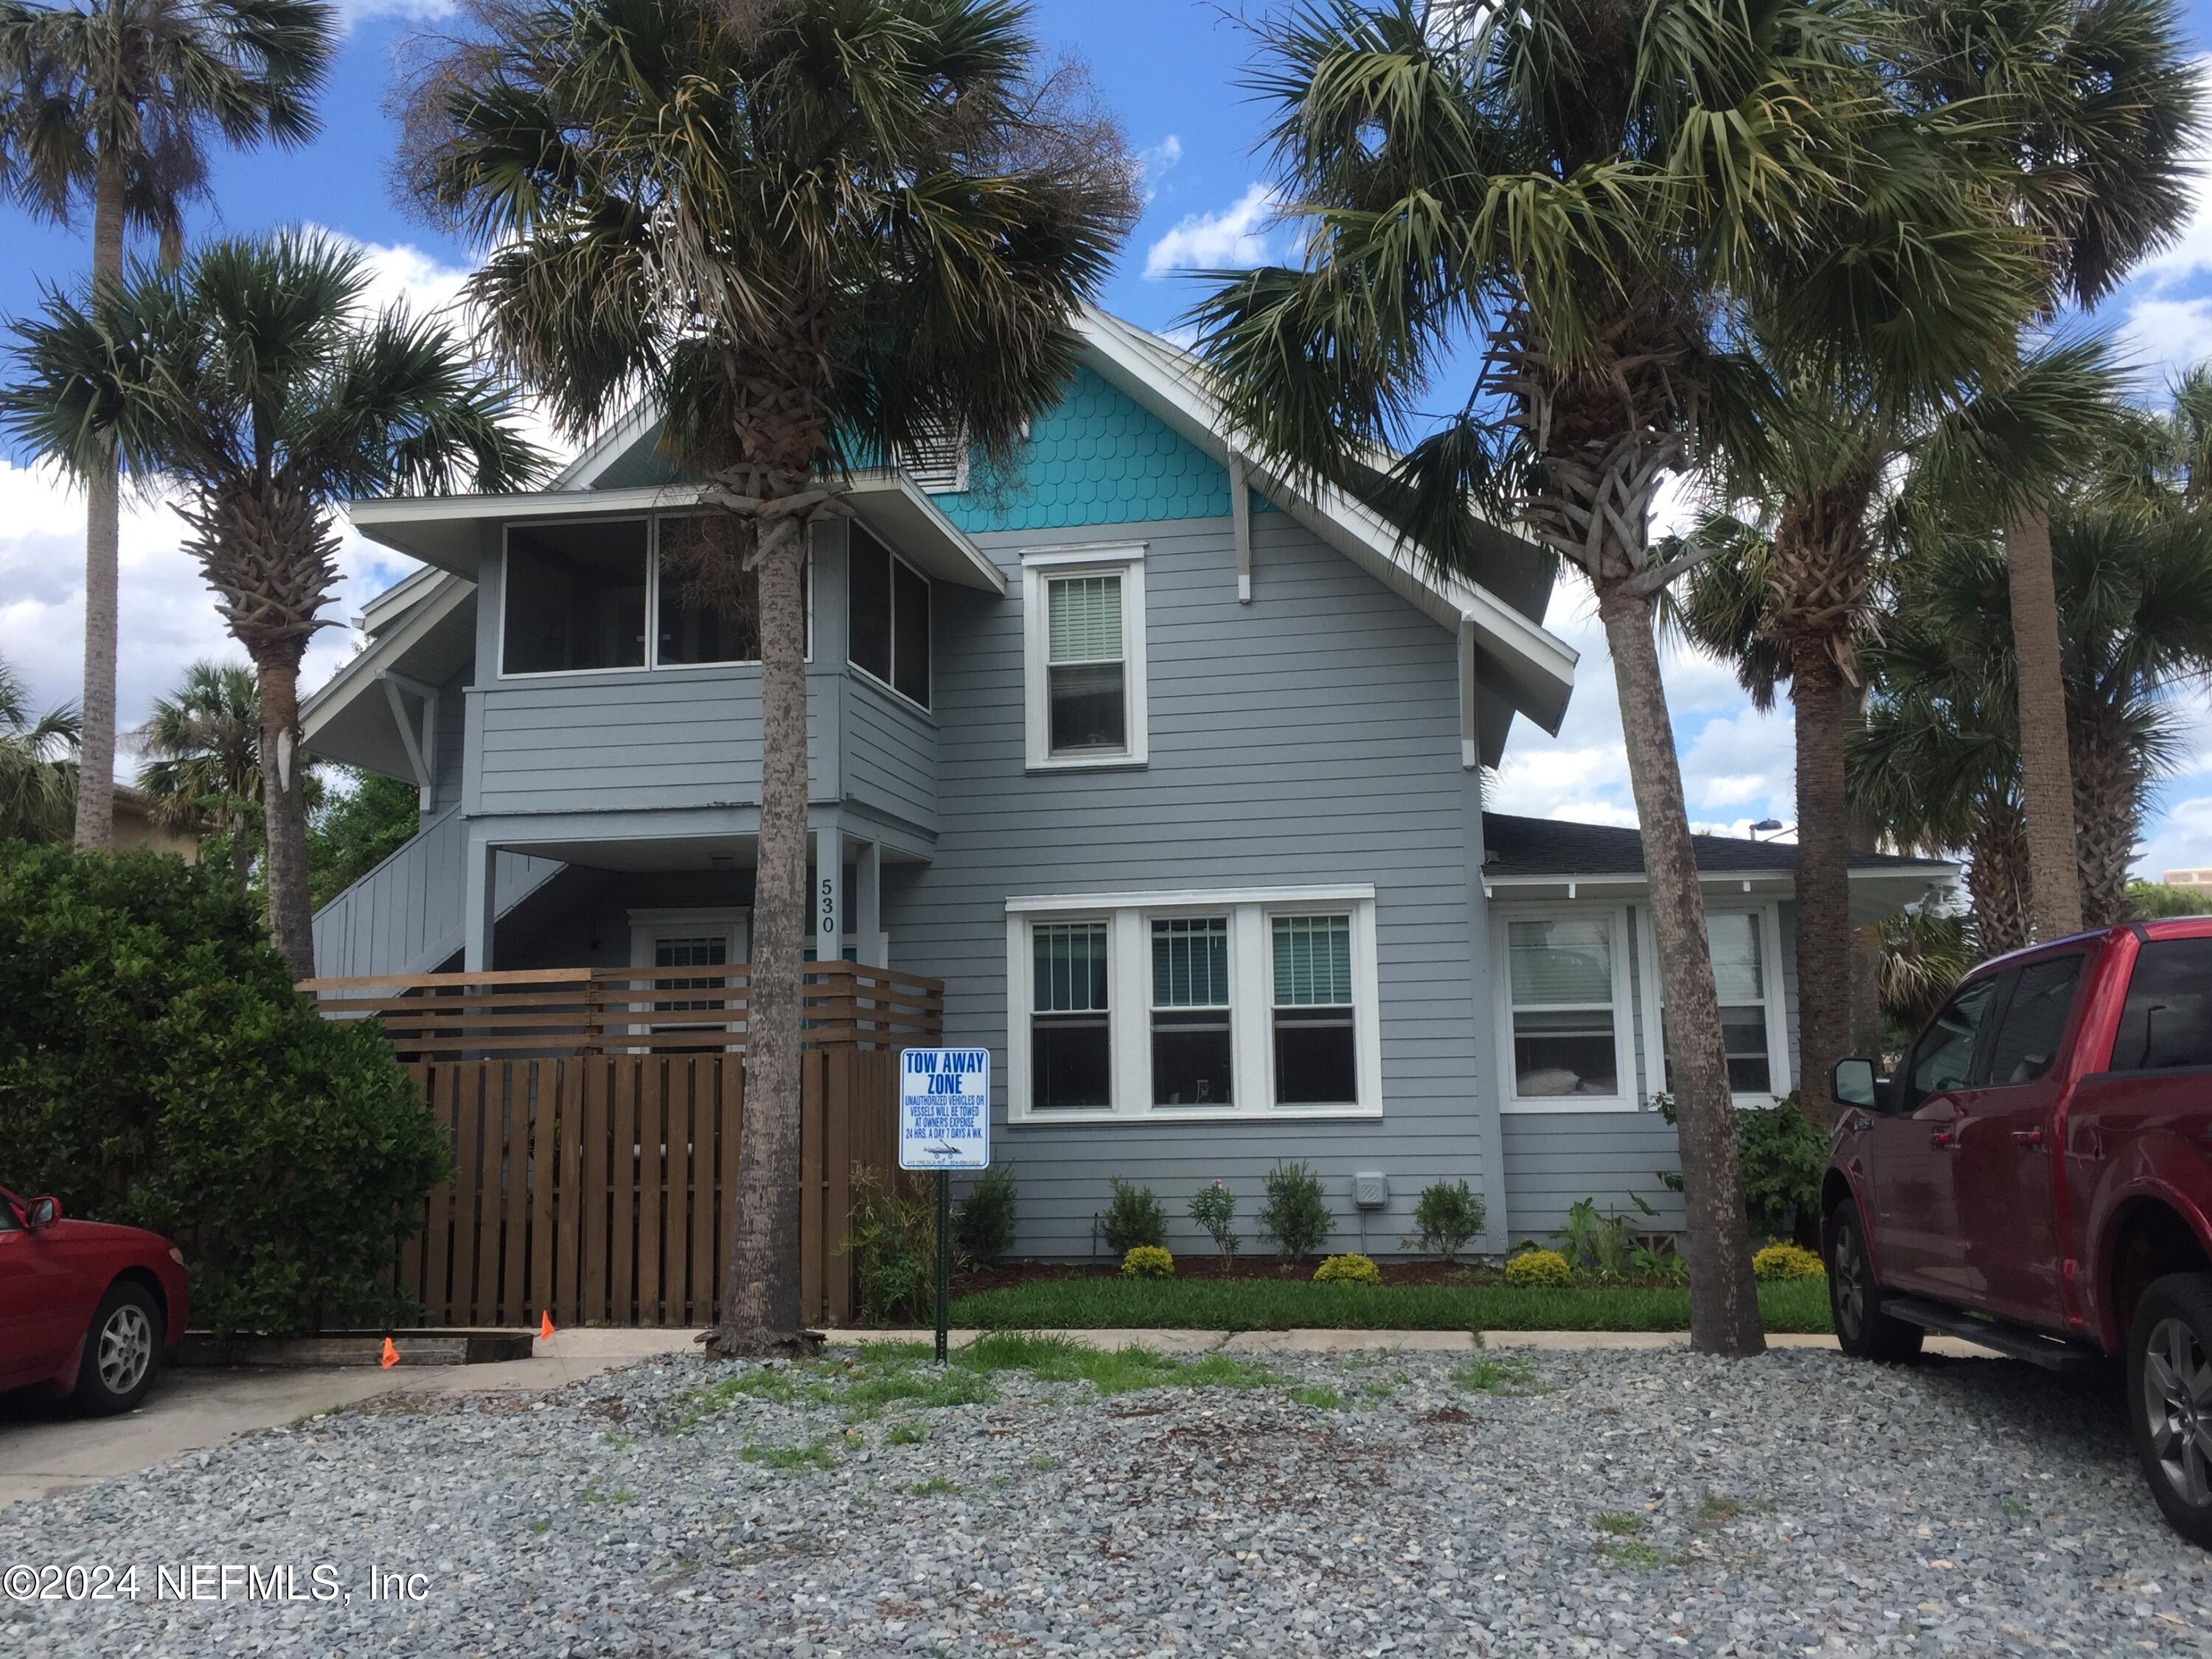 Jacksonville Beach, FL home for sale located at 530 2nd Street S Unit 2, Jacksonville Beach, FL 32250